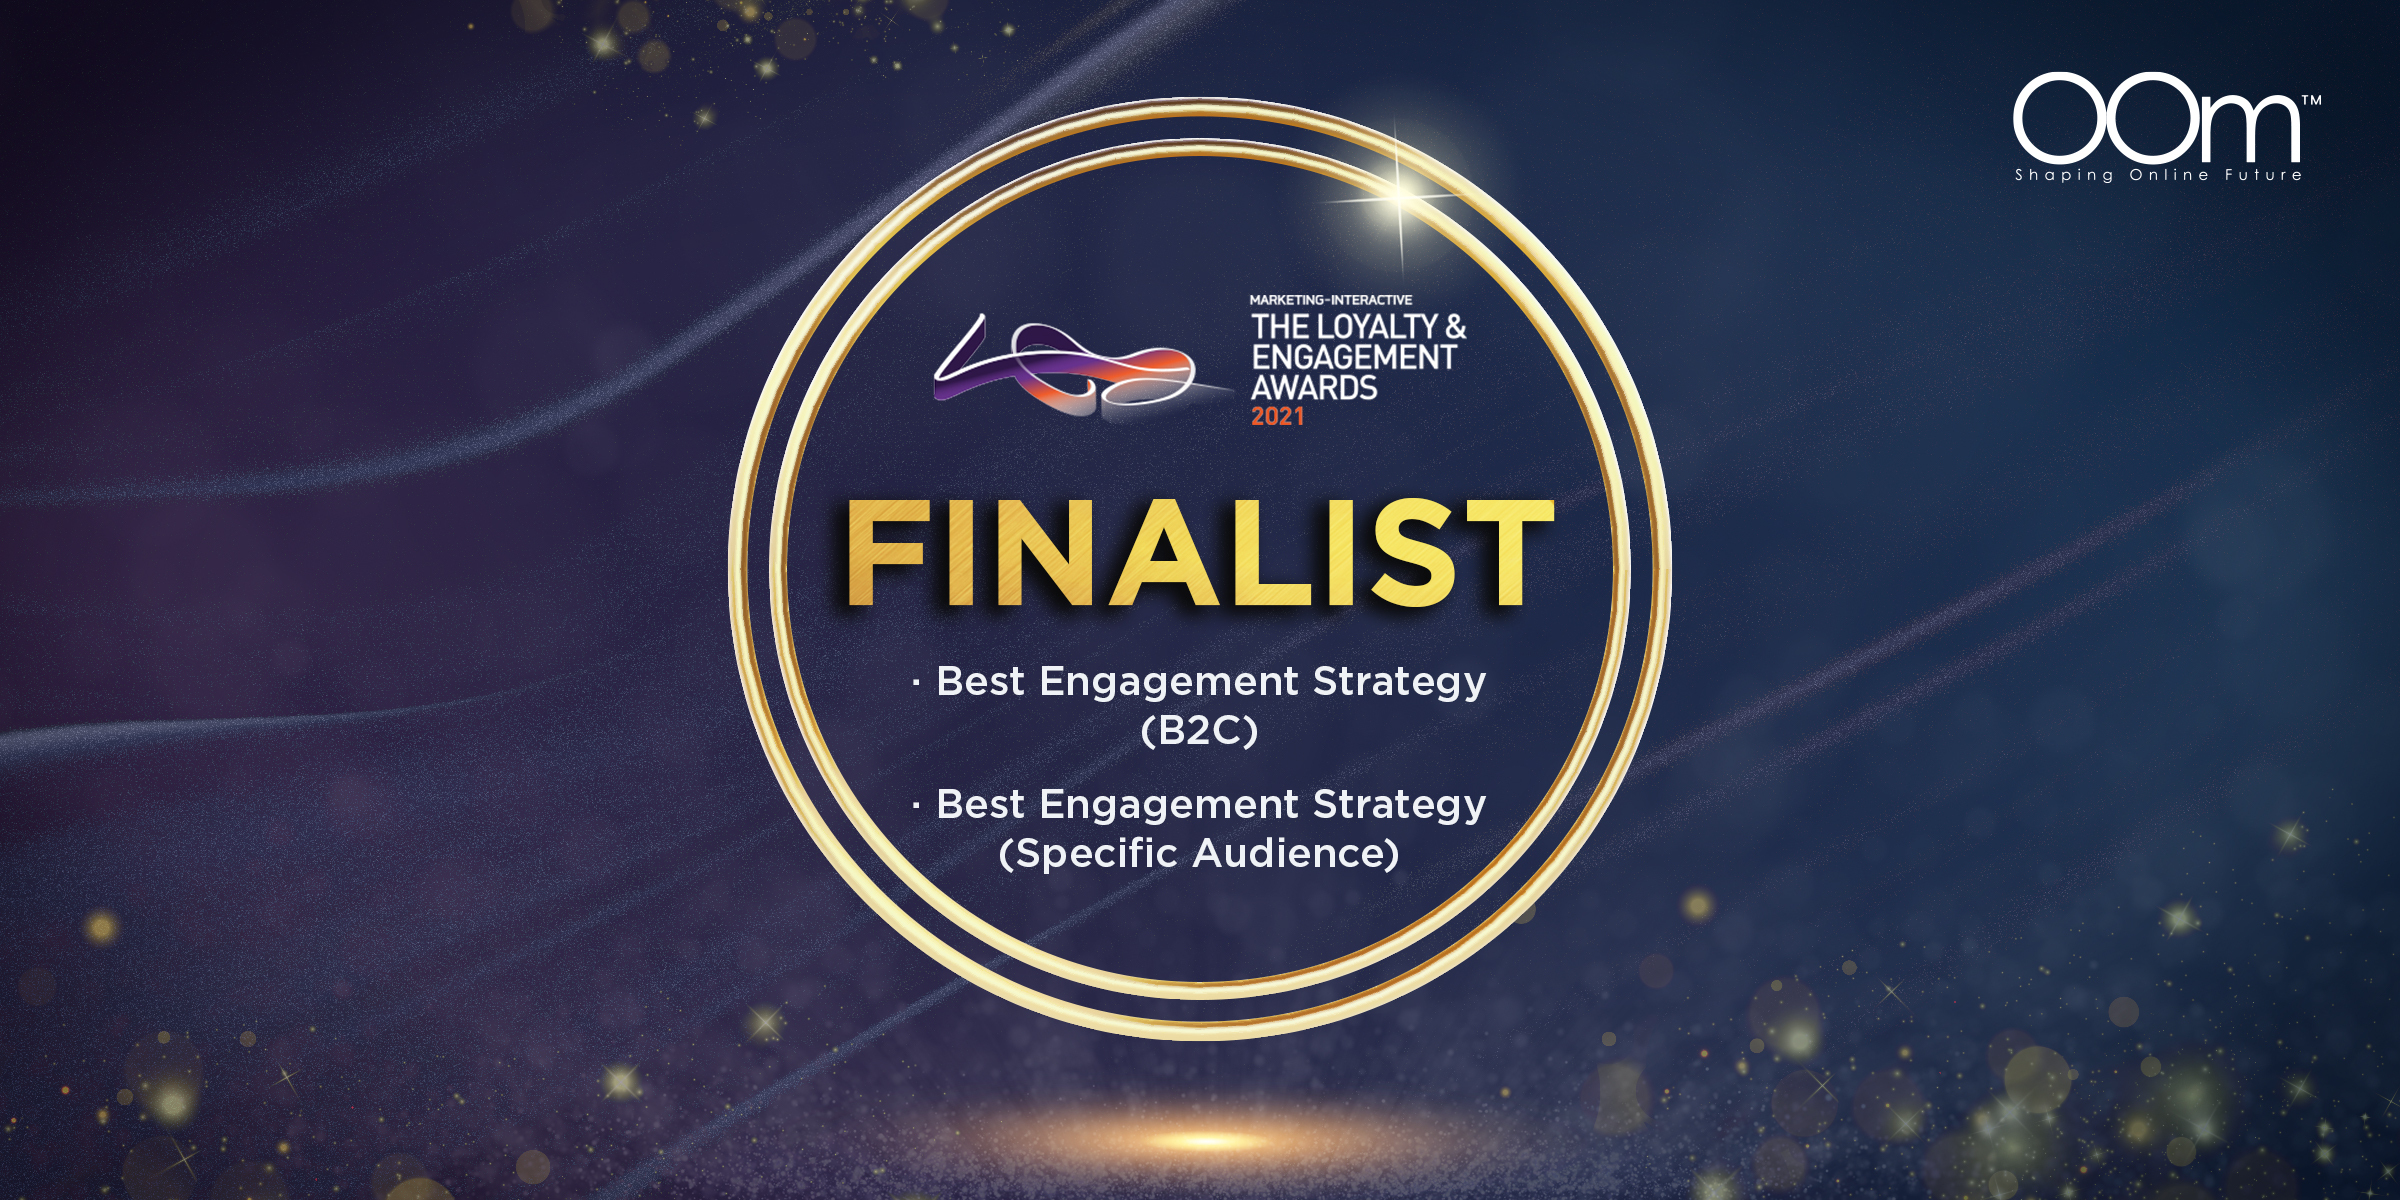 OOm Digital Marketing Agency - Shortlisted Finalist By The Loyalty And Engagement Awards 2021